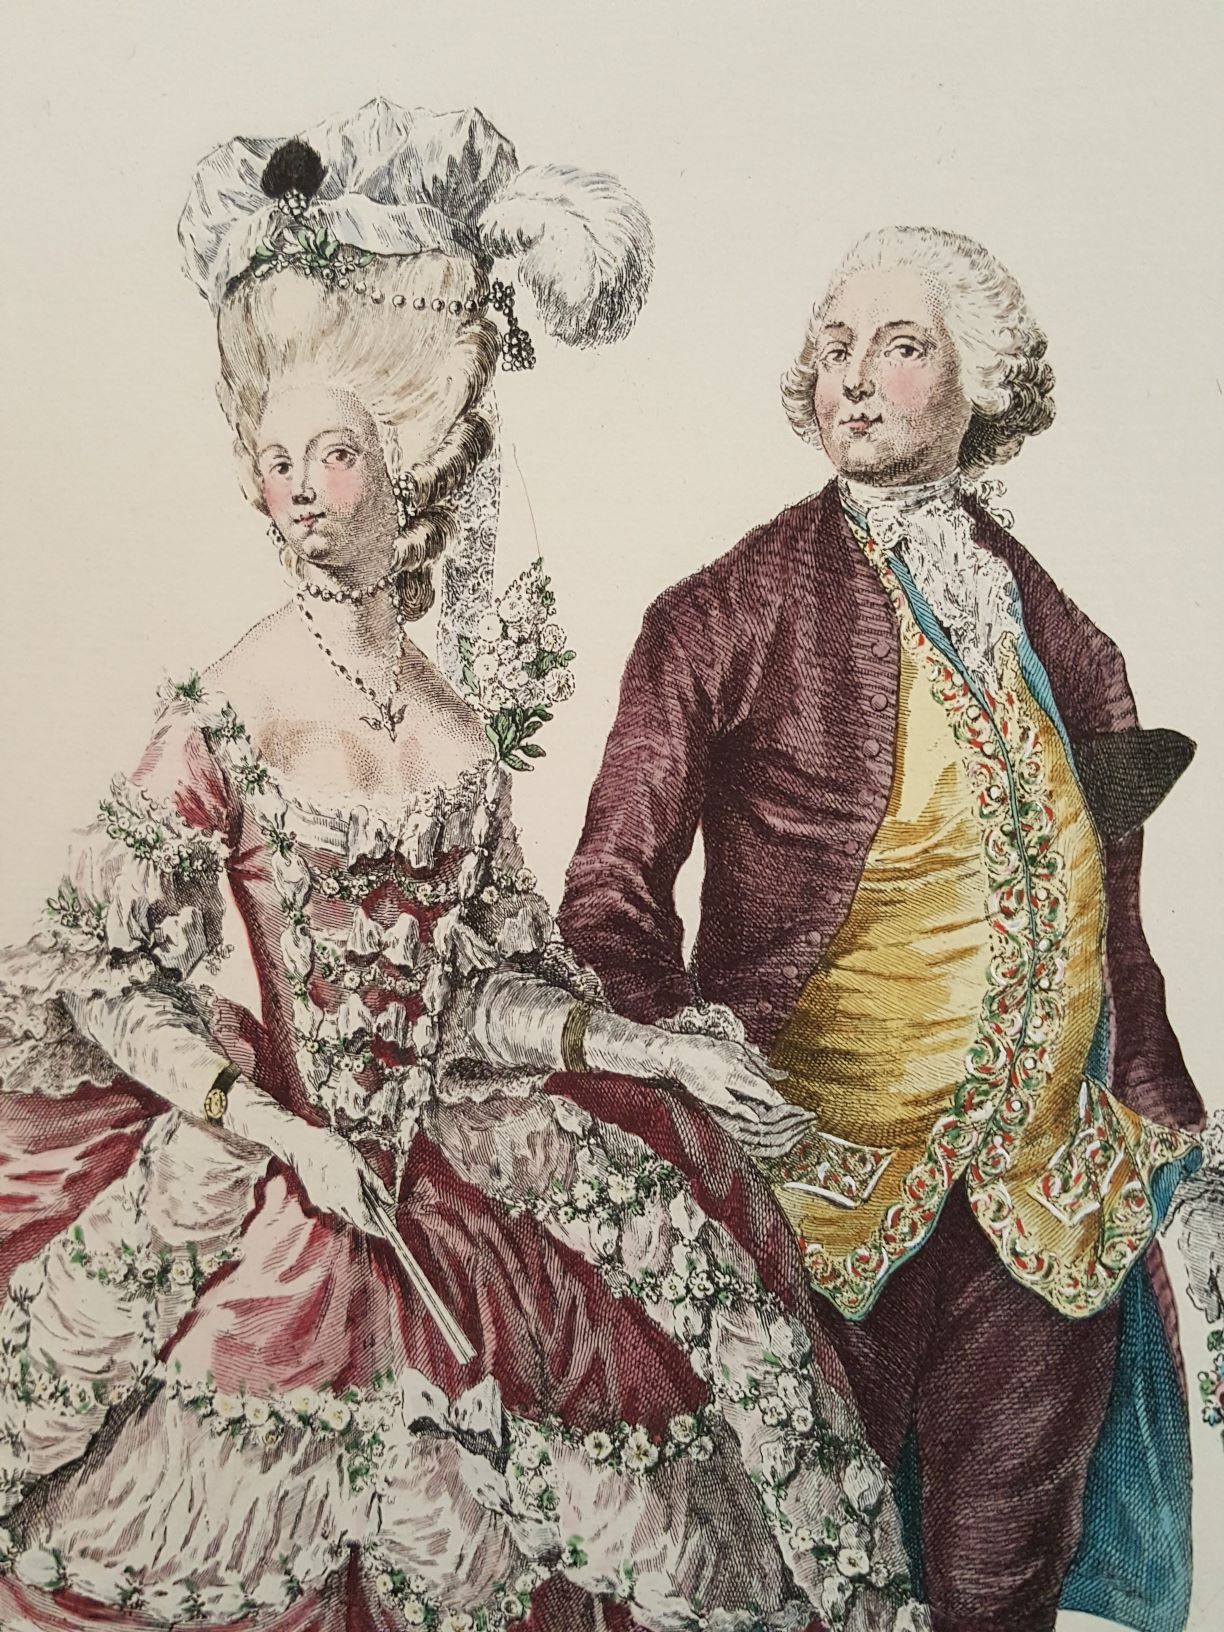 This image features woman and man wearing wigs, very elegant, fancy clothing. man wearing yellow waistcoat.